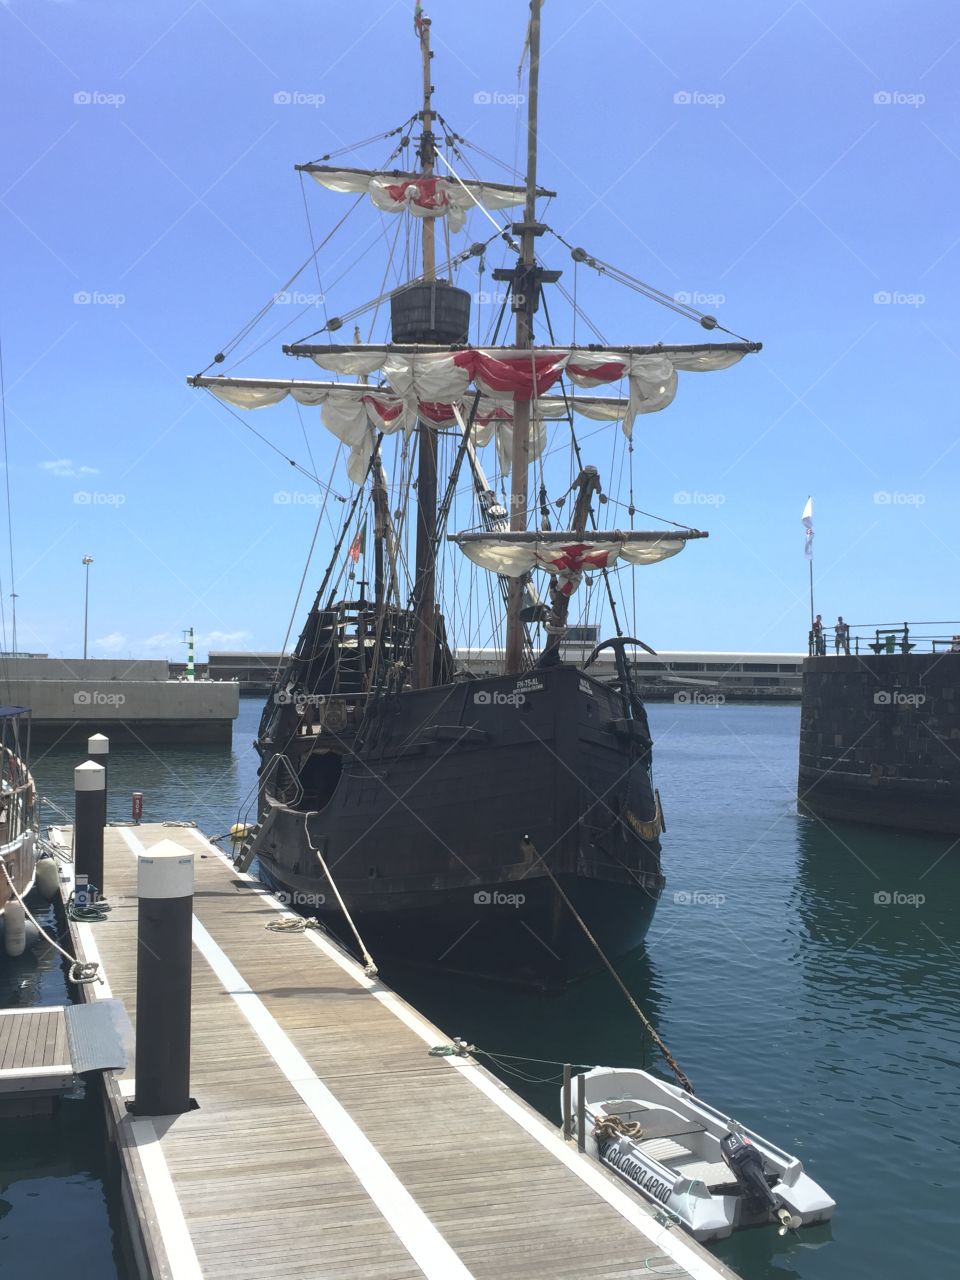 Pirate ship in Madere, Portugal